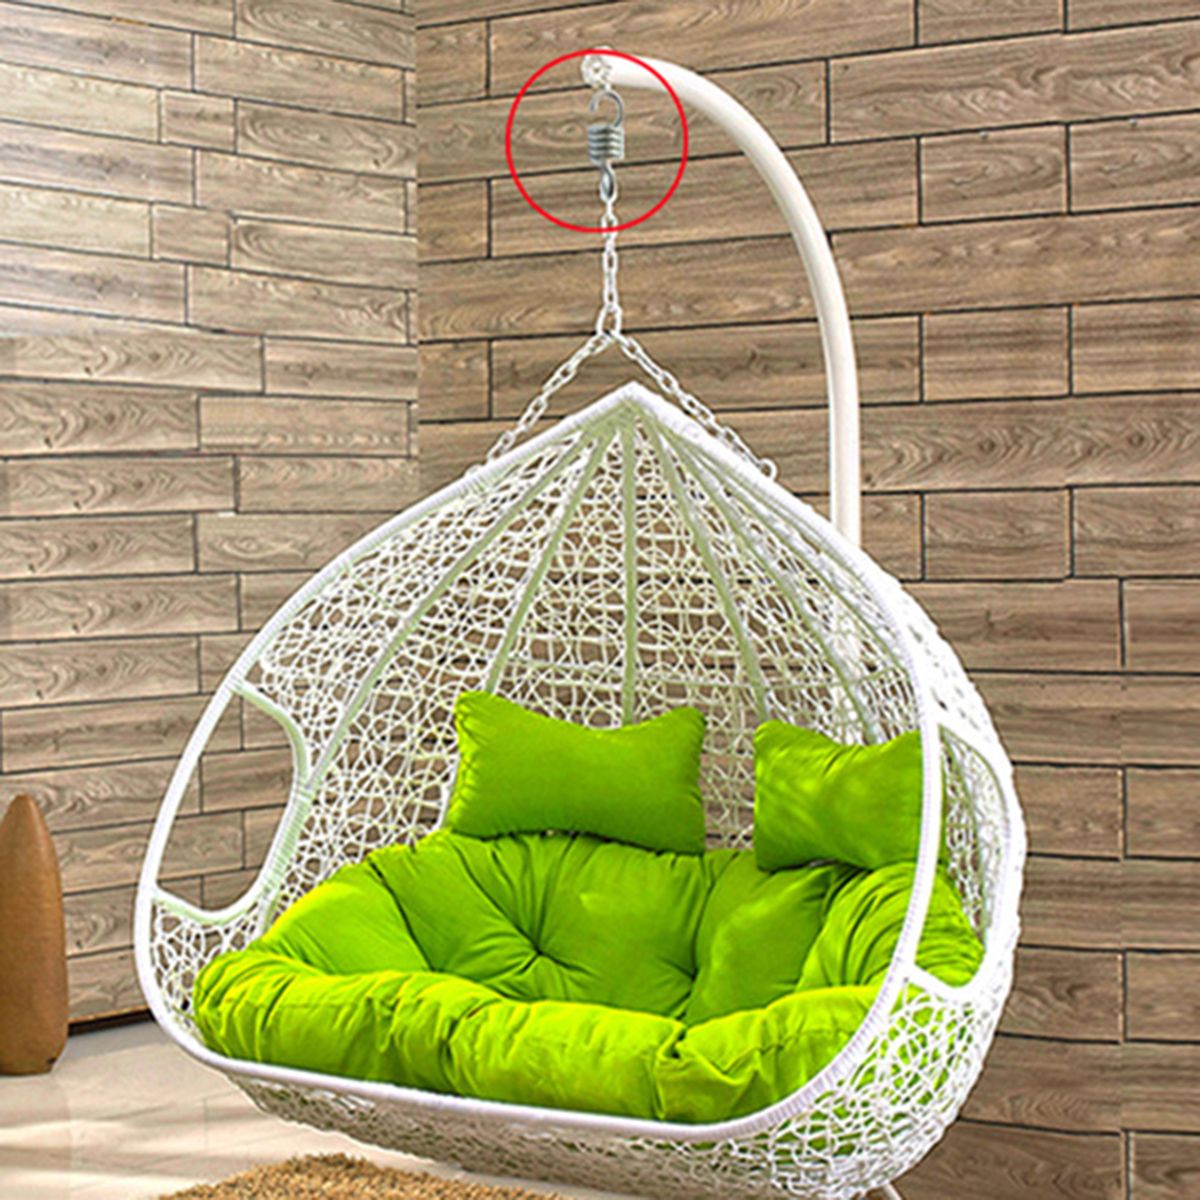 2PCS-Heavy-Duty-Suspension-Hook-Spring-For-2-3-Seat-Hanging-Chair-Garden-Swing-1338489